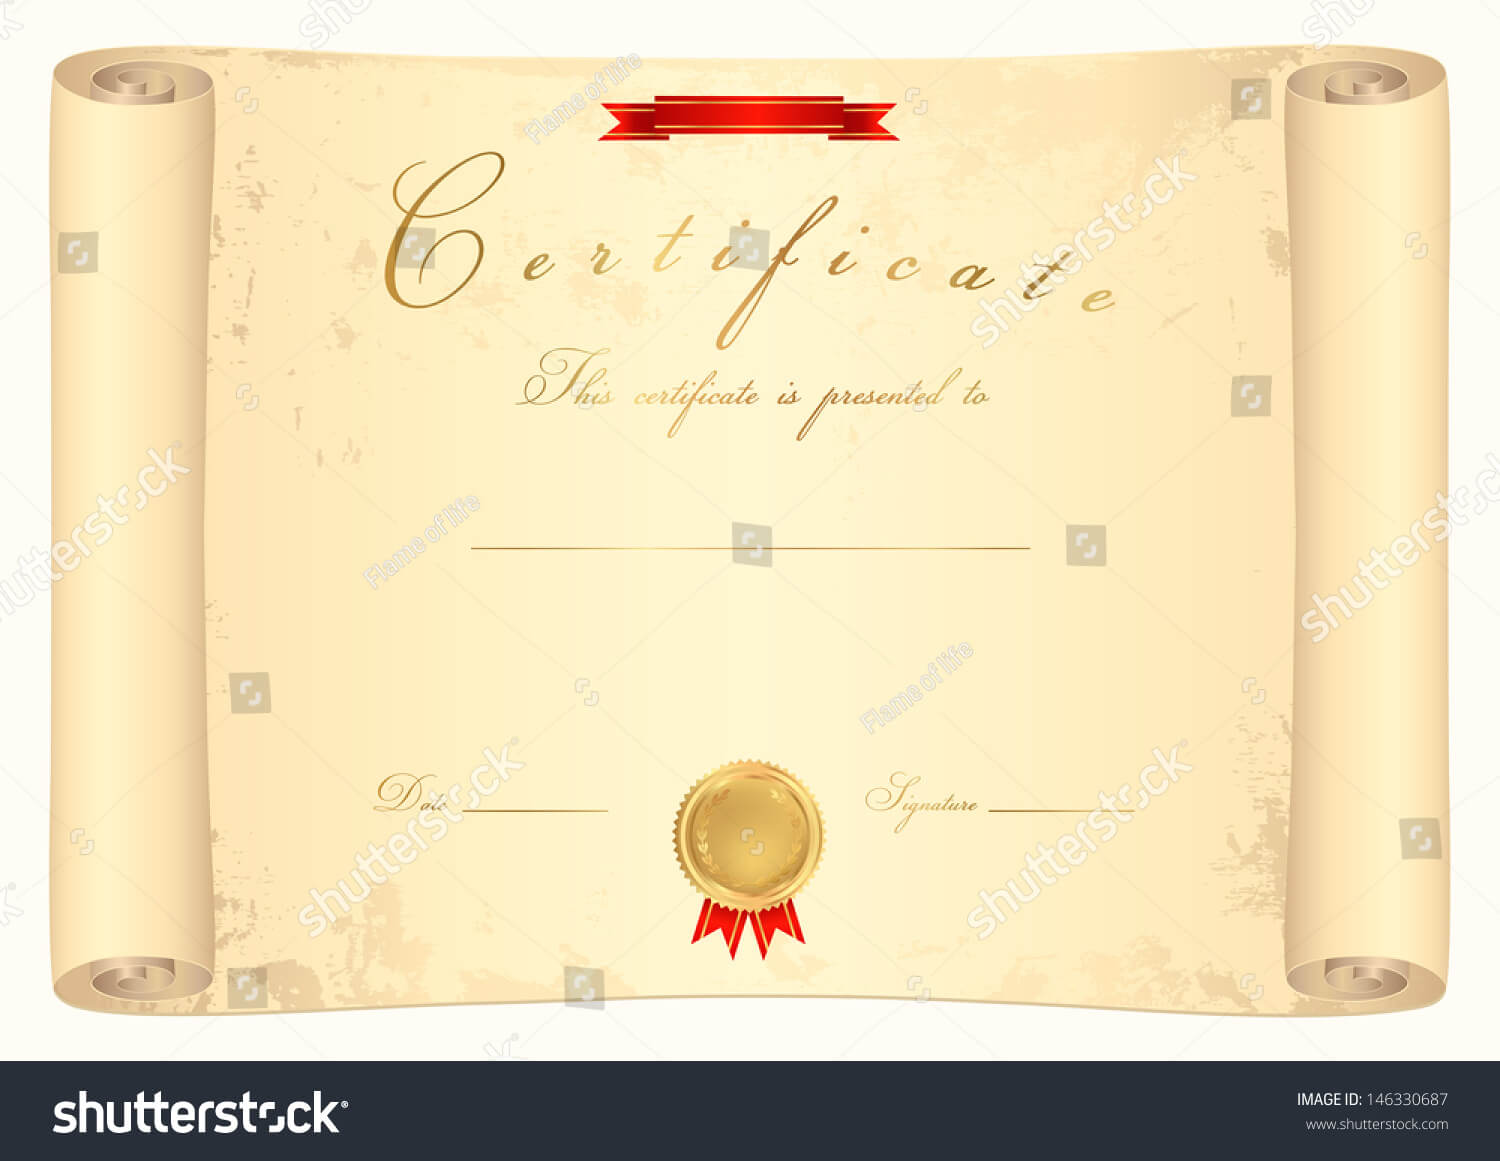 Scroll Certificate Completion Template Sample Background For Certificate Scroll Template